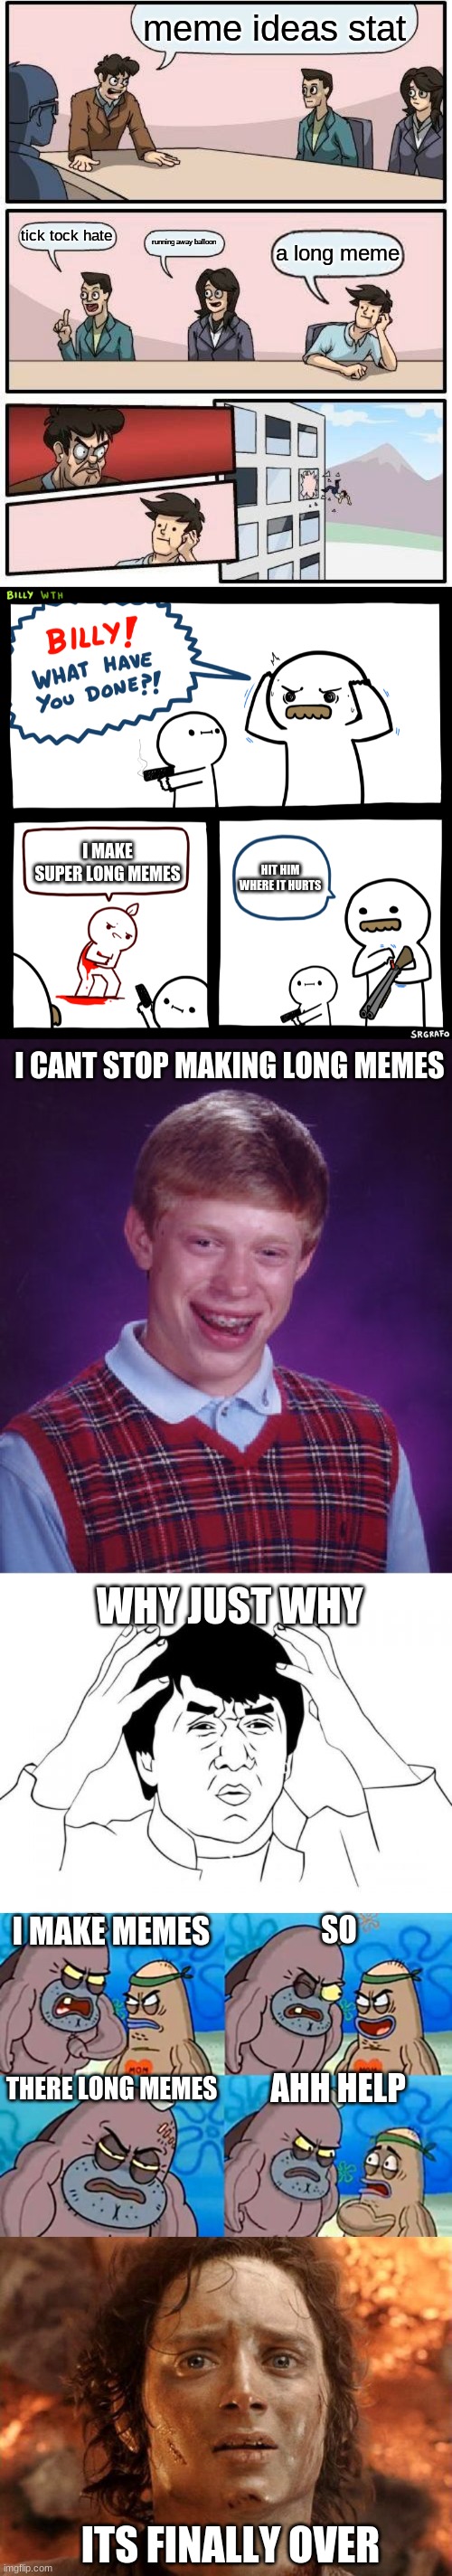 meme ideas stat; tick tock hate; running away balloon; a long meme; I MAKE SUPER LONG MEMES; HIT HIM WHERE IT HURTS; I CANT STOP MAKING LONG MEMES; WHY JUST WHY; I MAKE MEMES; SO; AHH HELP; THERE LONG MEMES; ITS FINALLY OVER | image tagged in memes,boardroom meeting suggestion,billy what have you done,bad luck brian,jackie chan wtf,welcome to the salty spitoon | made w/ Imgflip meme maker